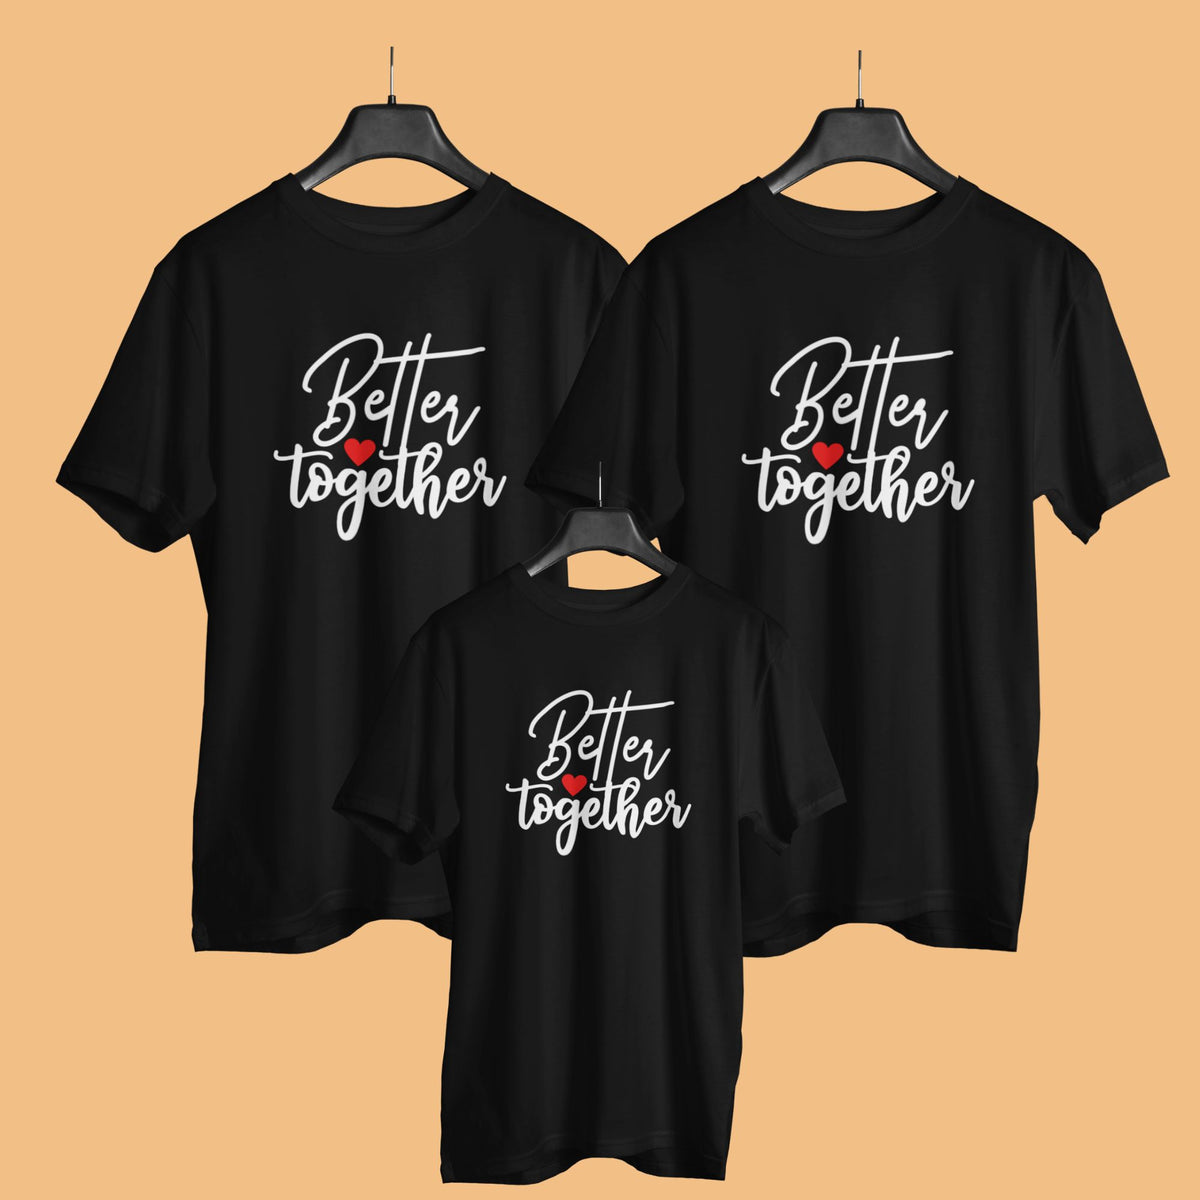 better-together-matching-family-black-t-shirts-for-mom-dad-son-daughter-gogirgit-hanger